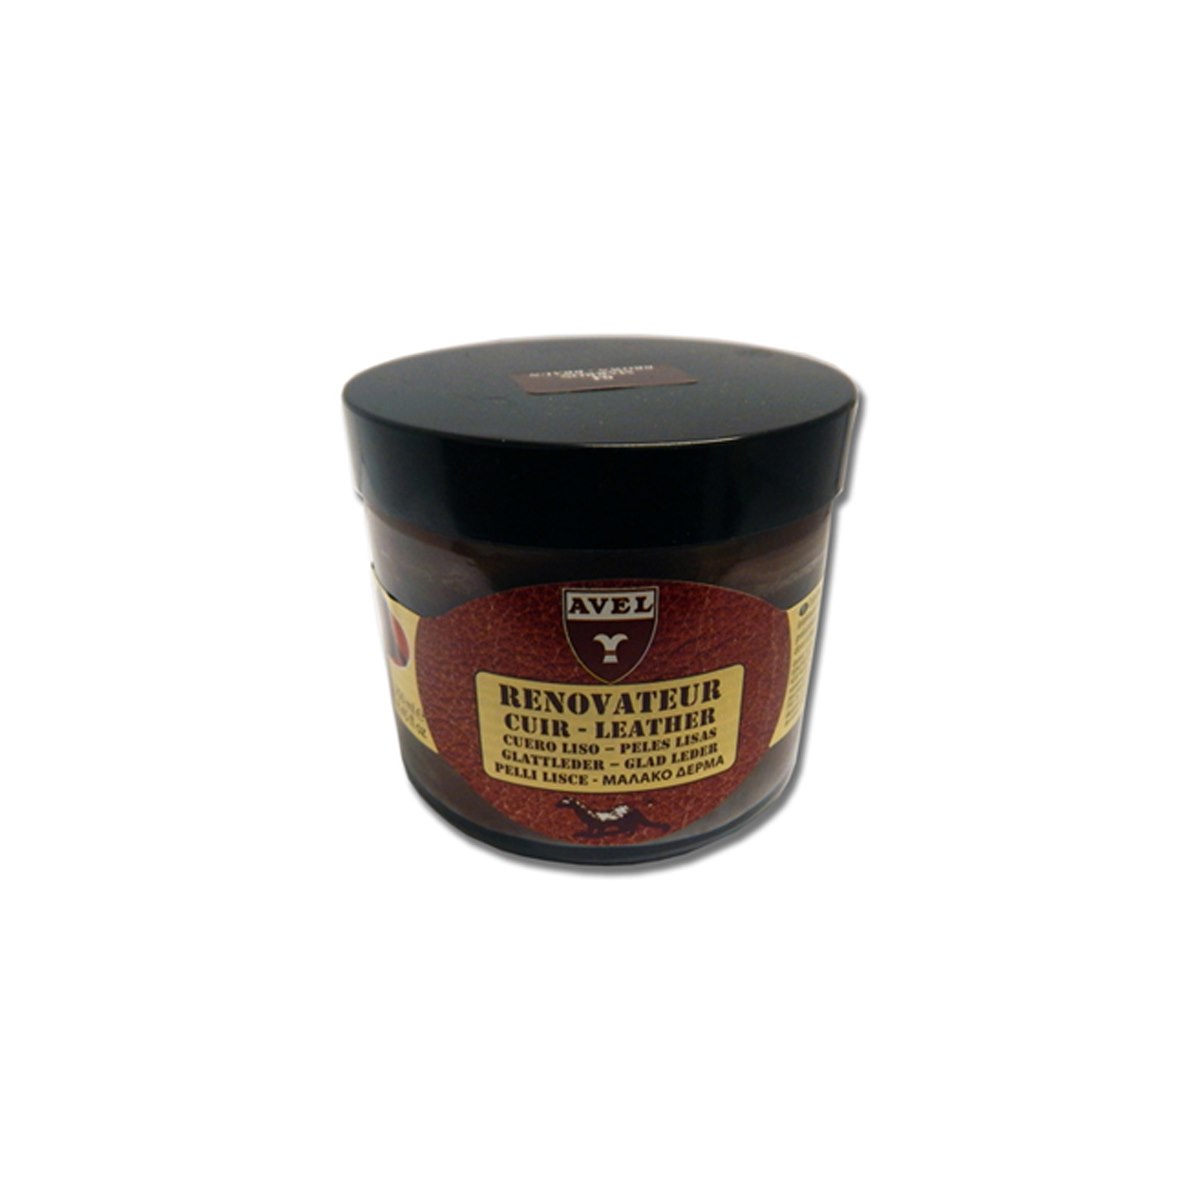 Avel Leather Renovator Recolouring Balm Brown 250ml (Number 4)